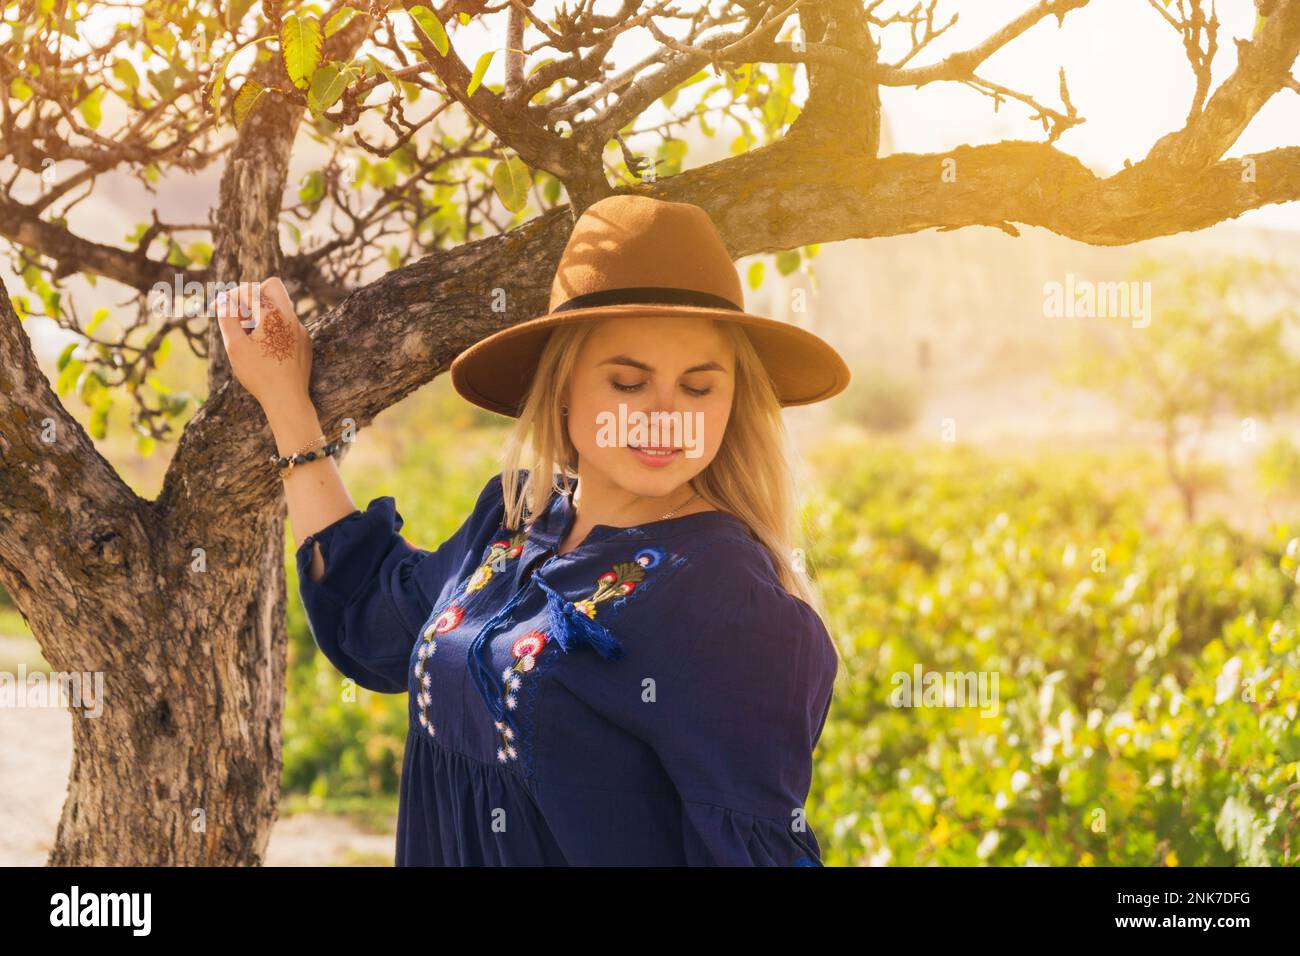 Beautiful blond hair woman wearing blue skirt and brown hat near tree in vineyard - plantation of grapevines. Spring dawn solar bright warm effect. Sl Stock Photo